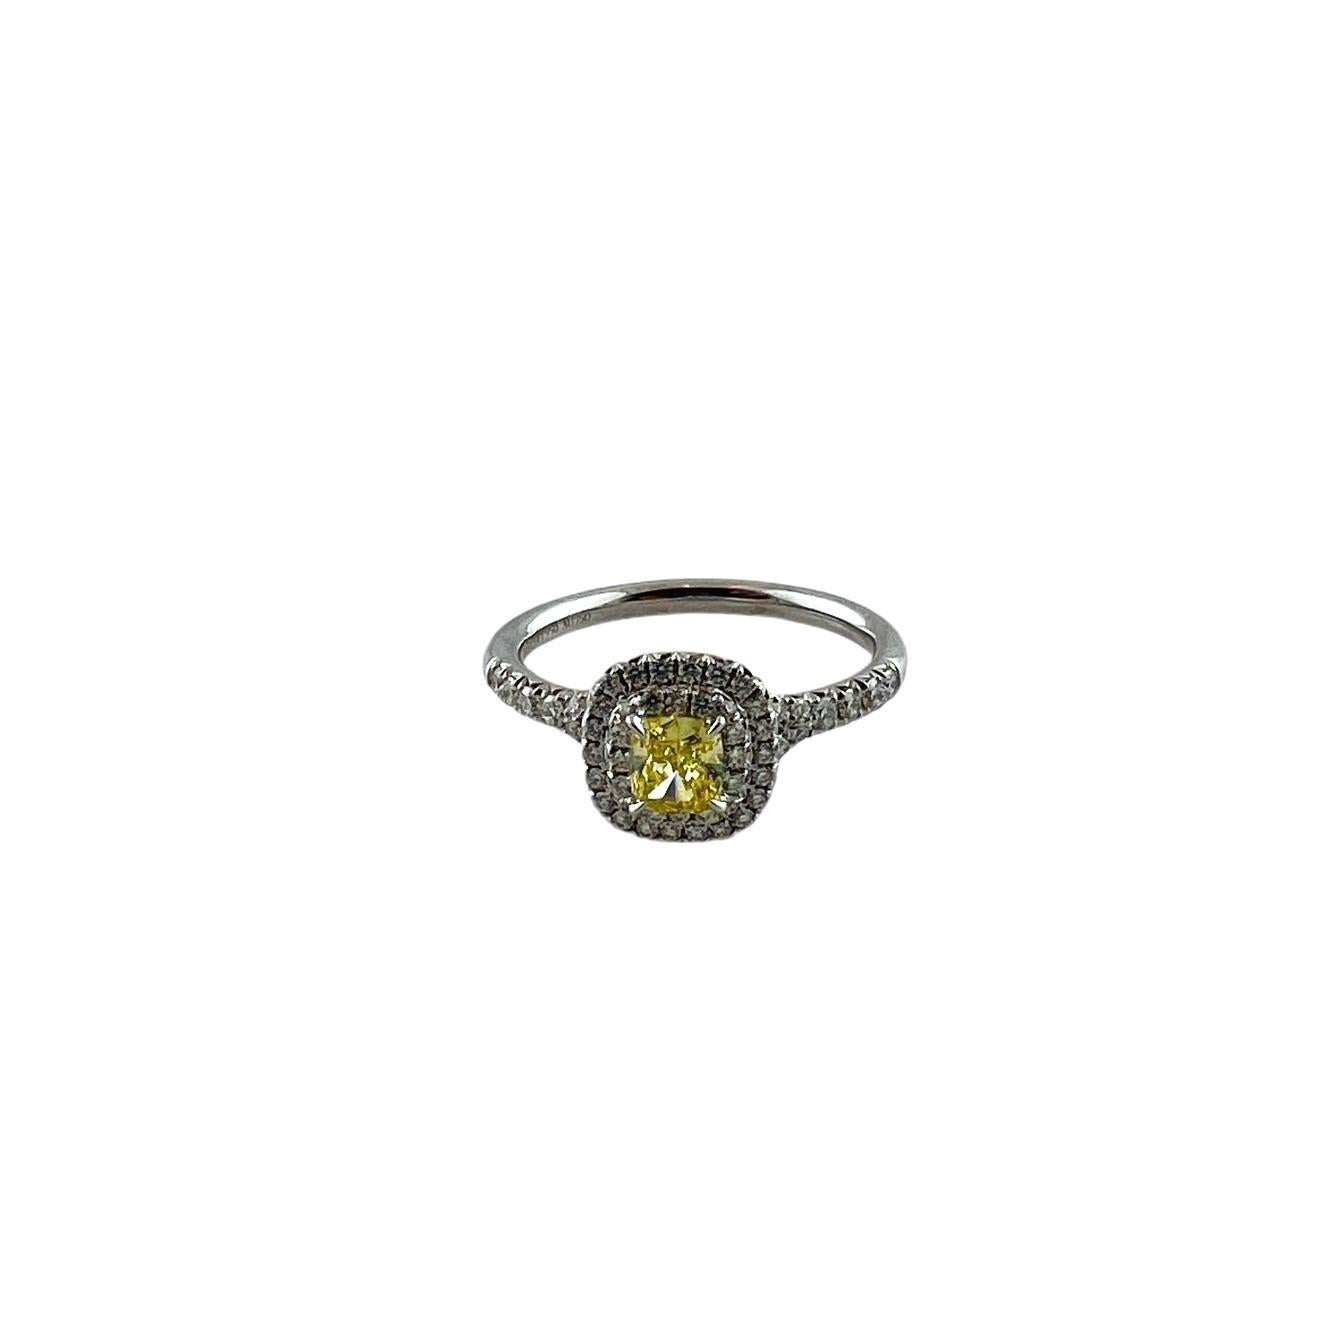 Tiffany & Co. Soleste Platinum Diamond Halo Ring

This sparkling Tiffany & Co. ring is from the Soleste collection.

Ring features a center fancy cushion cut yellow diamond that is 0.33 cts.  set in 18K white gold prongs

Halo and band are set with